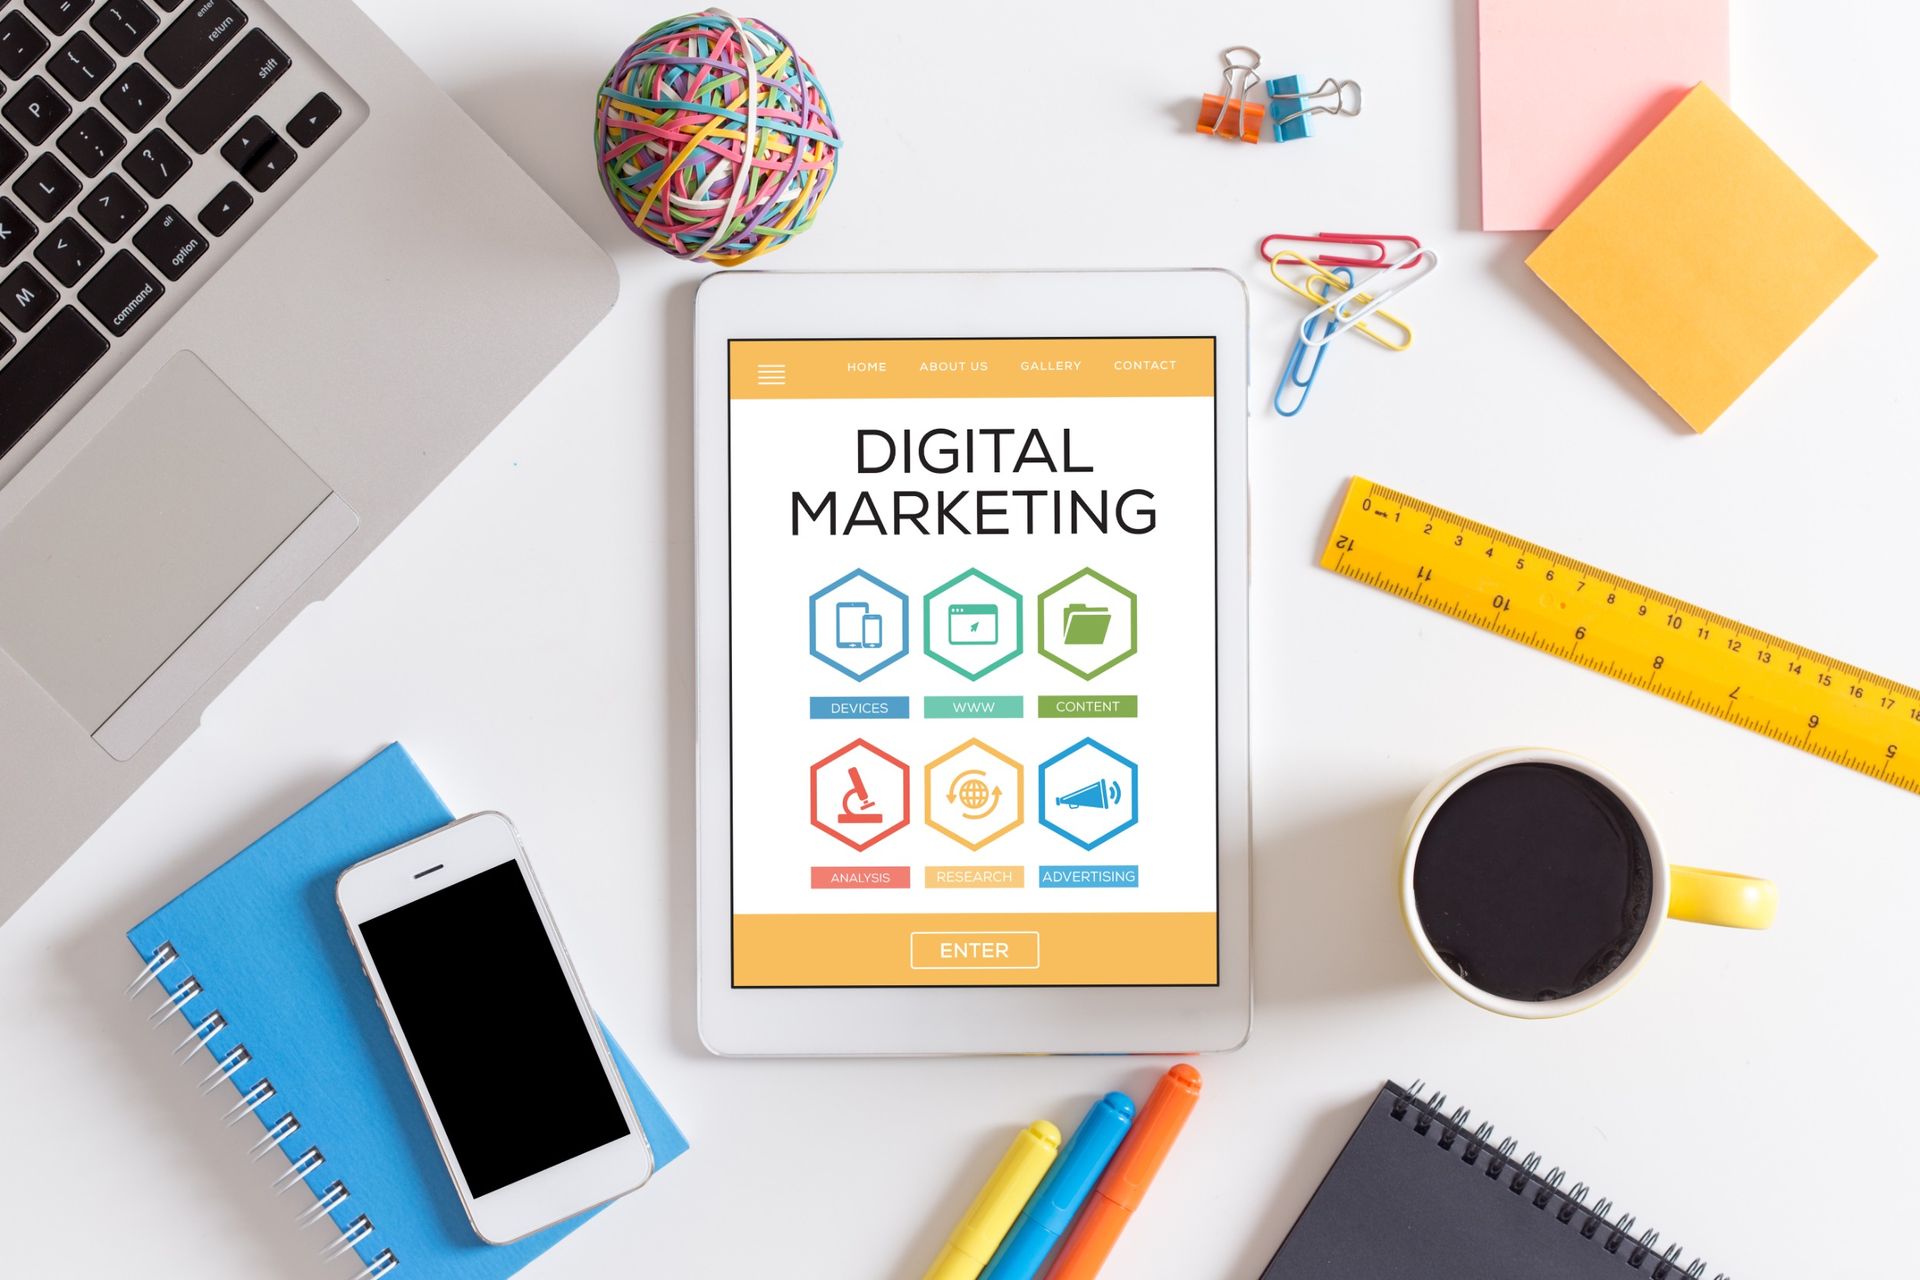 Digital Marketing for SMBs